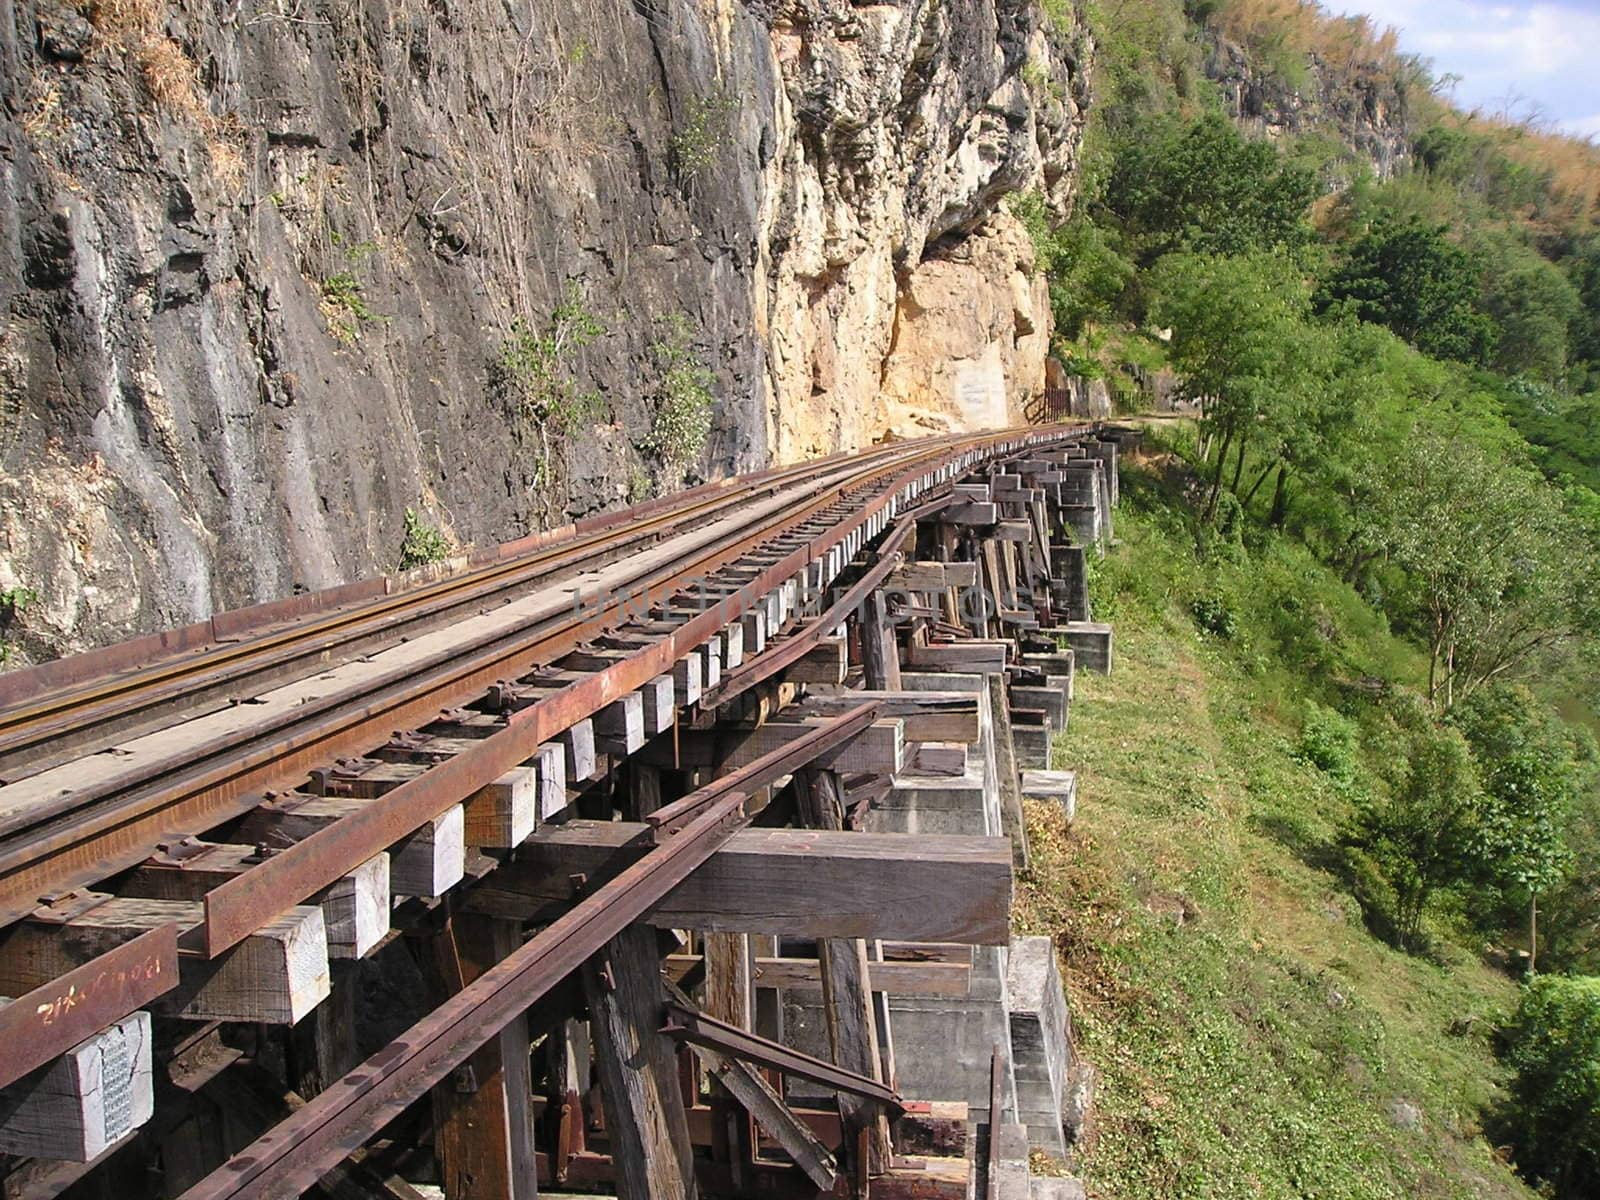 old railroad goes along the cliffs into the uncertainty. On it drive the trains already long ago. This is history. 